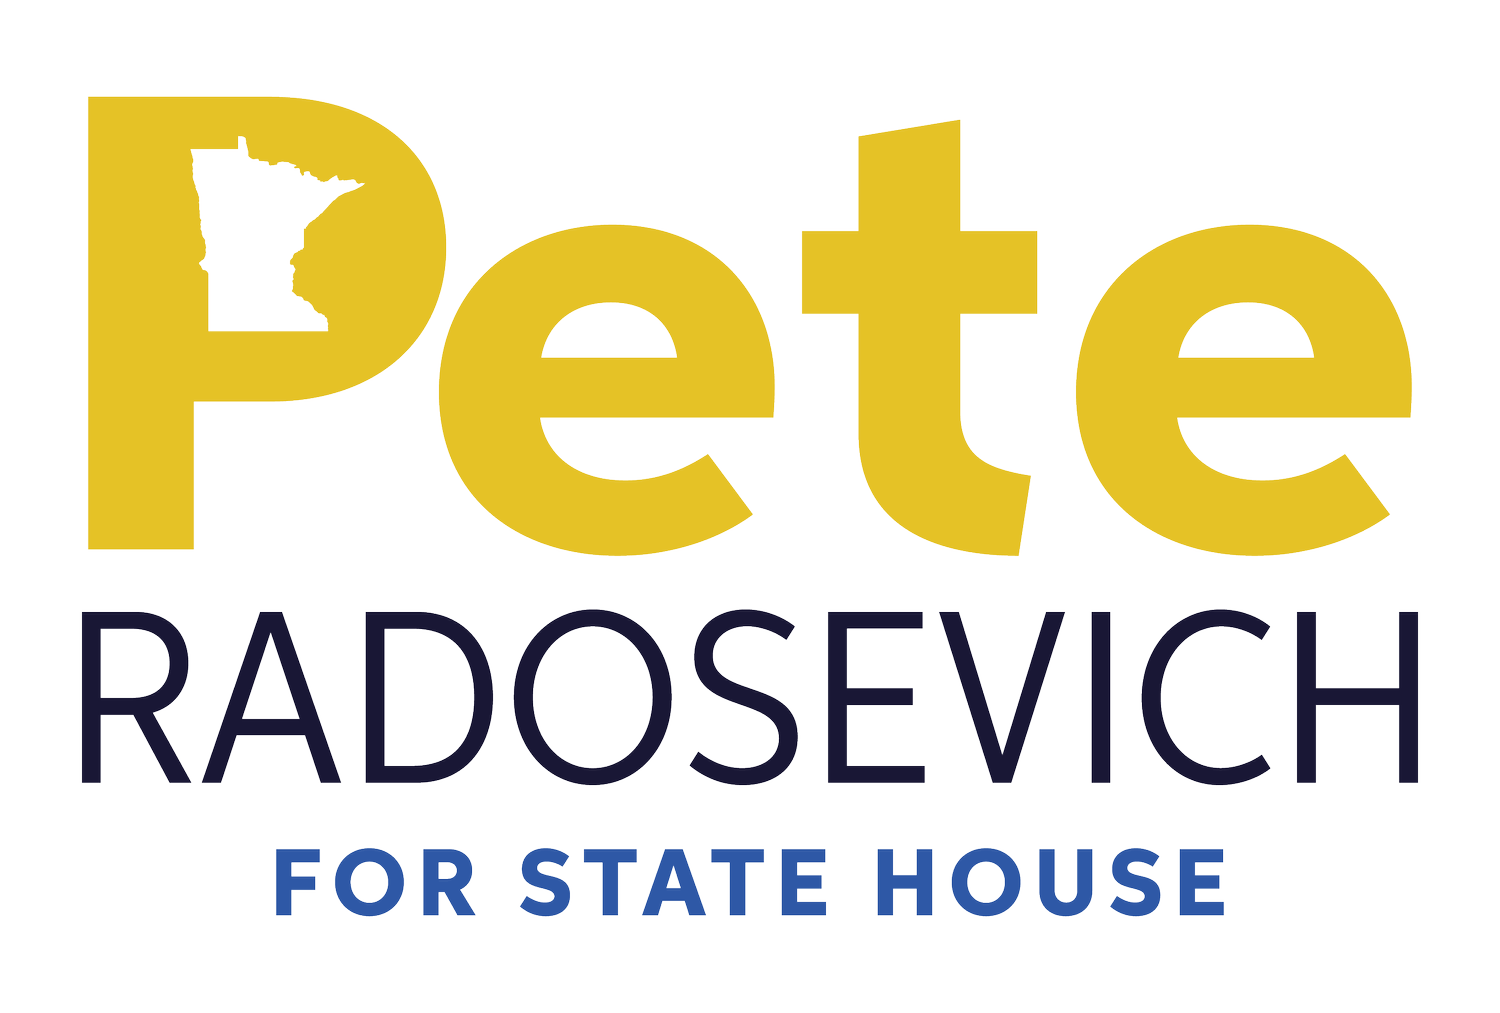 Pete Radosevich for House District 11A